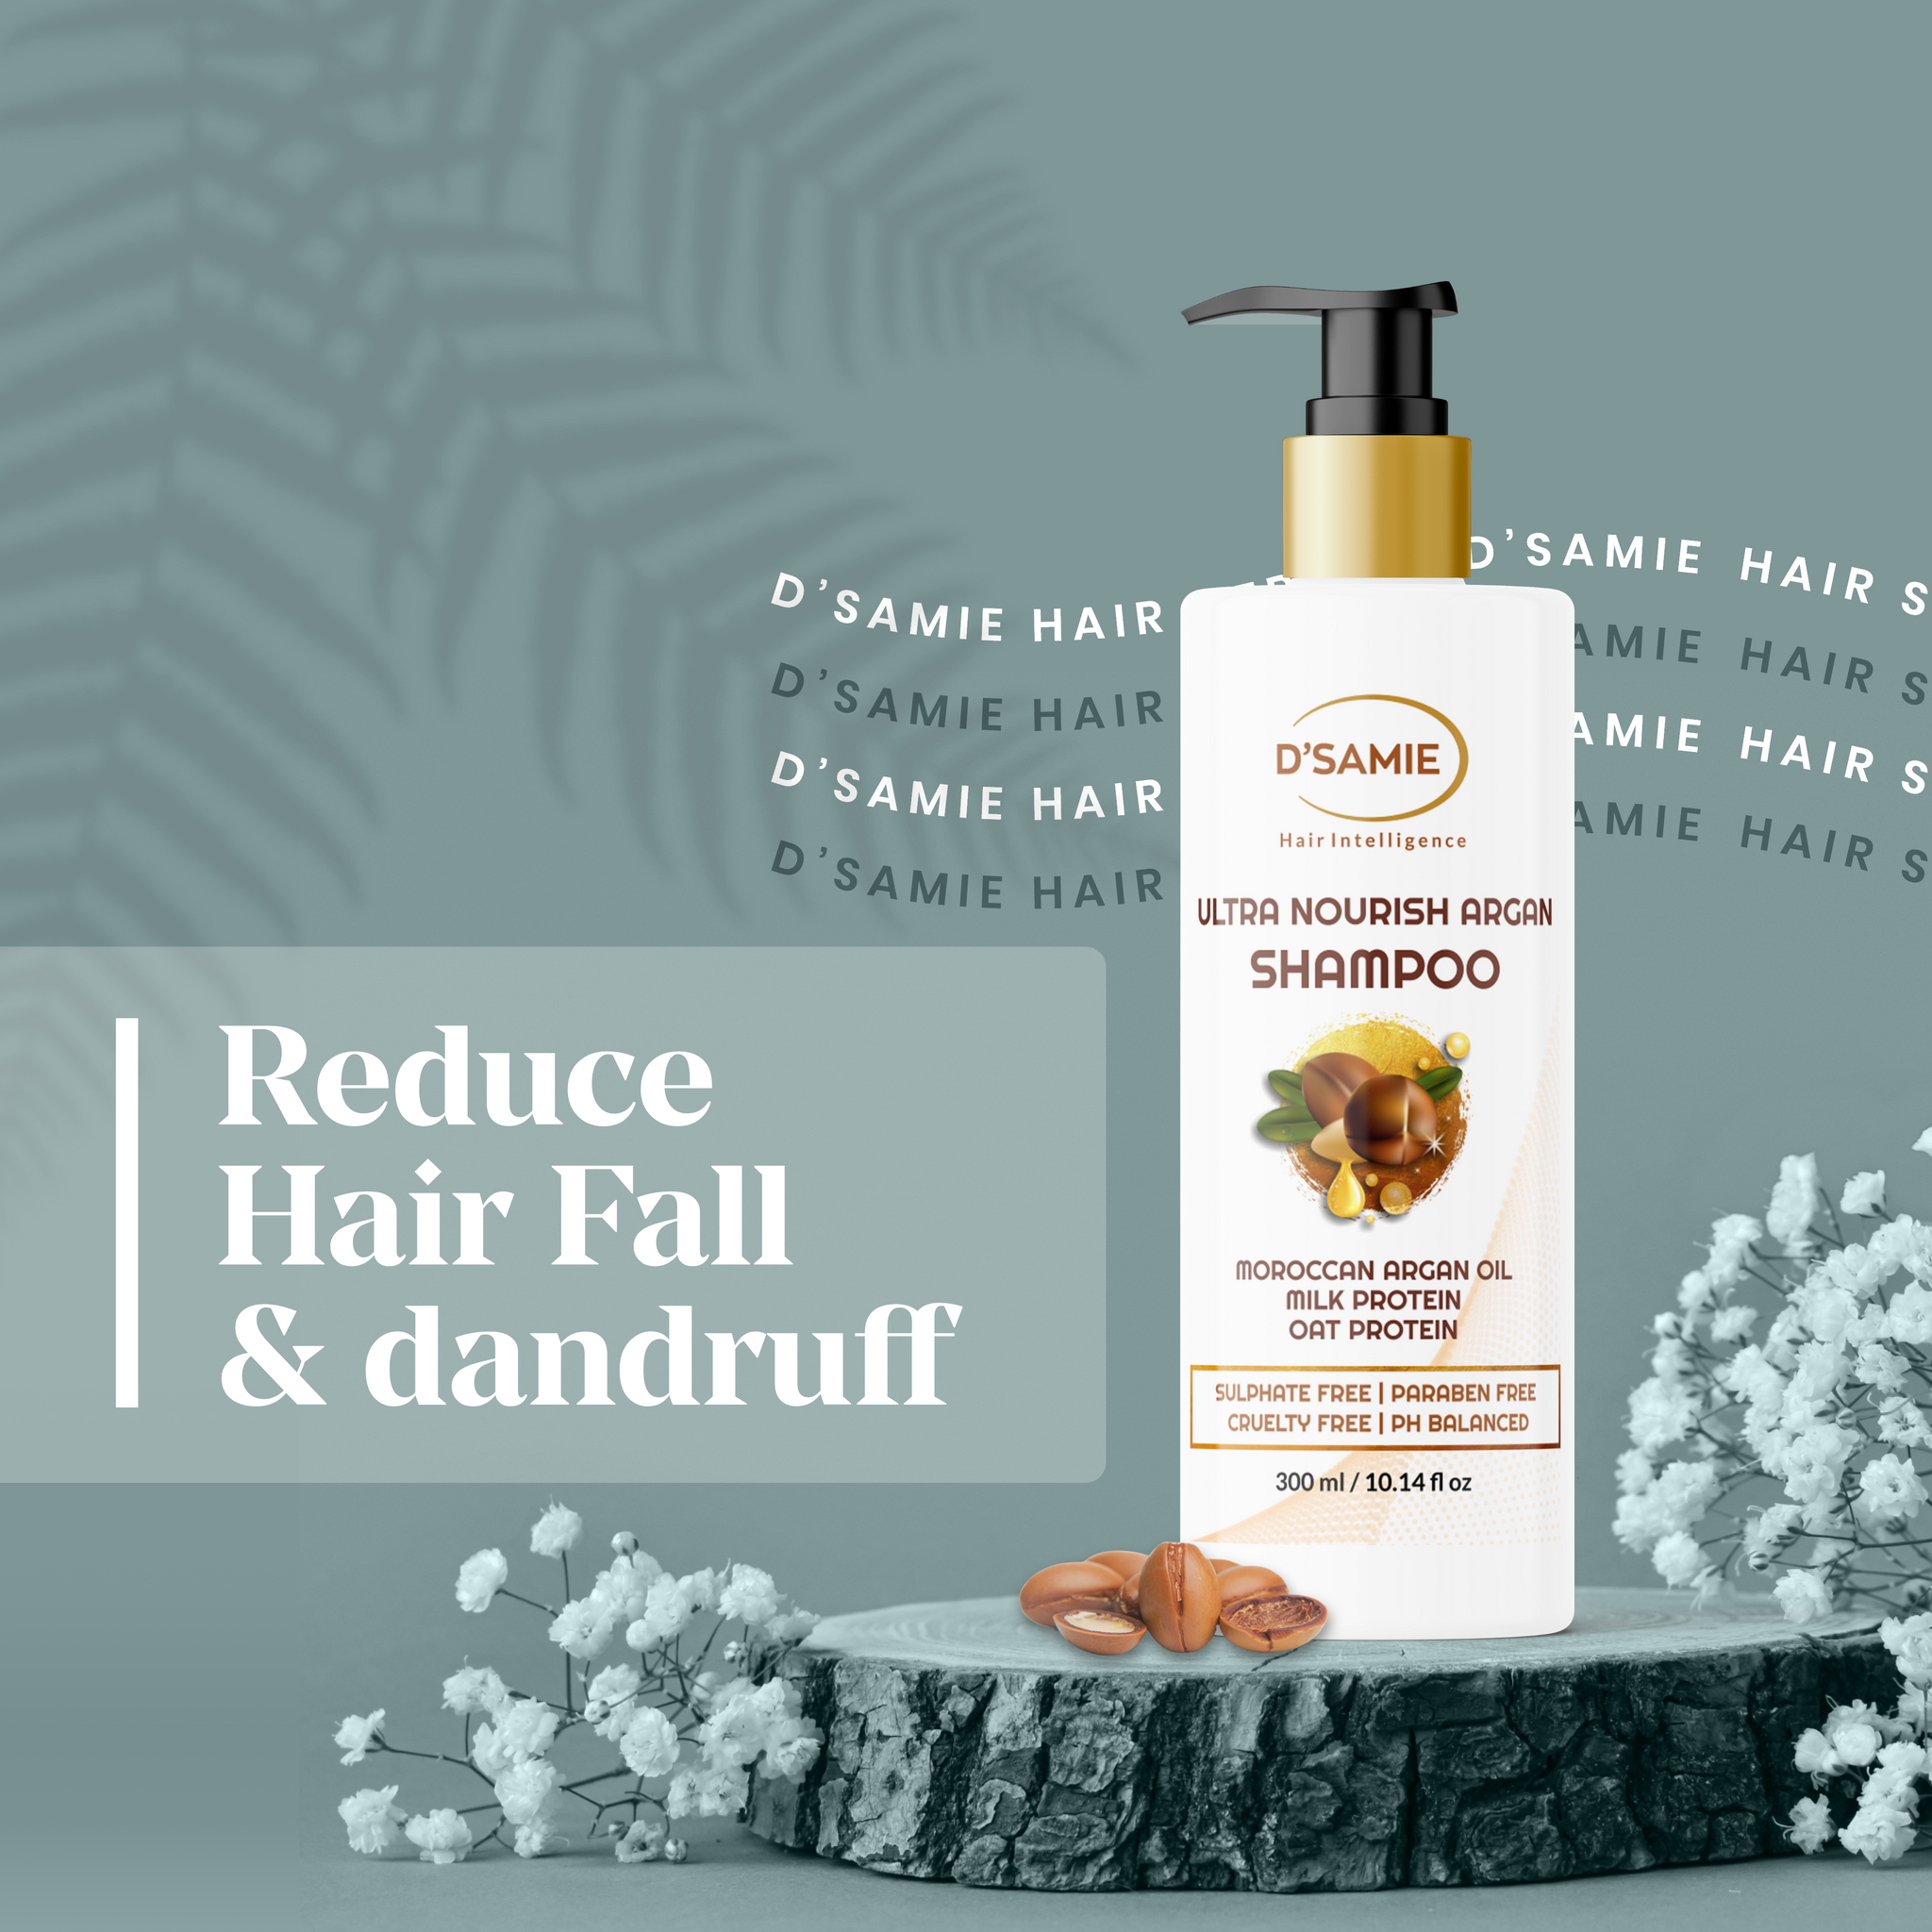 Combo Ultra Nourish Argan Shampoo & Facewash exfoliating cleanser with cherry and strawberry extrack